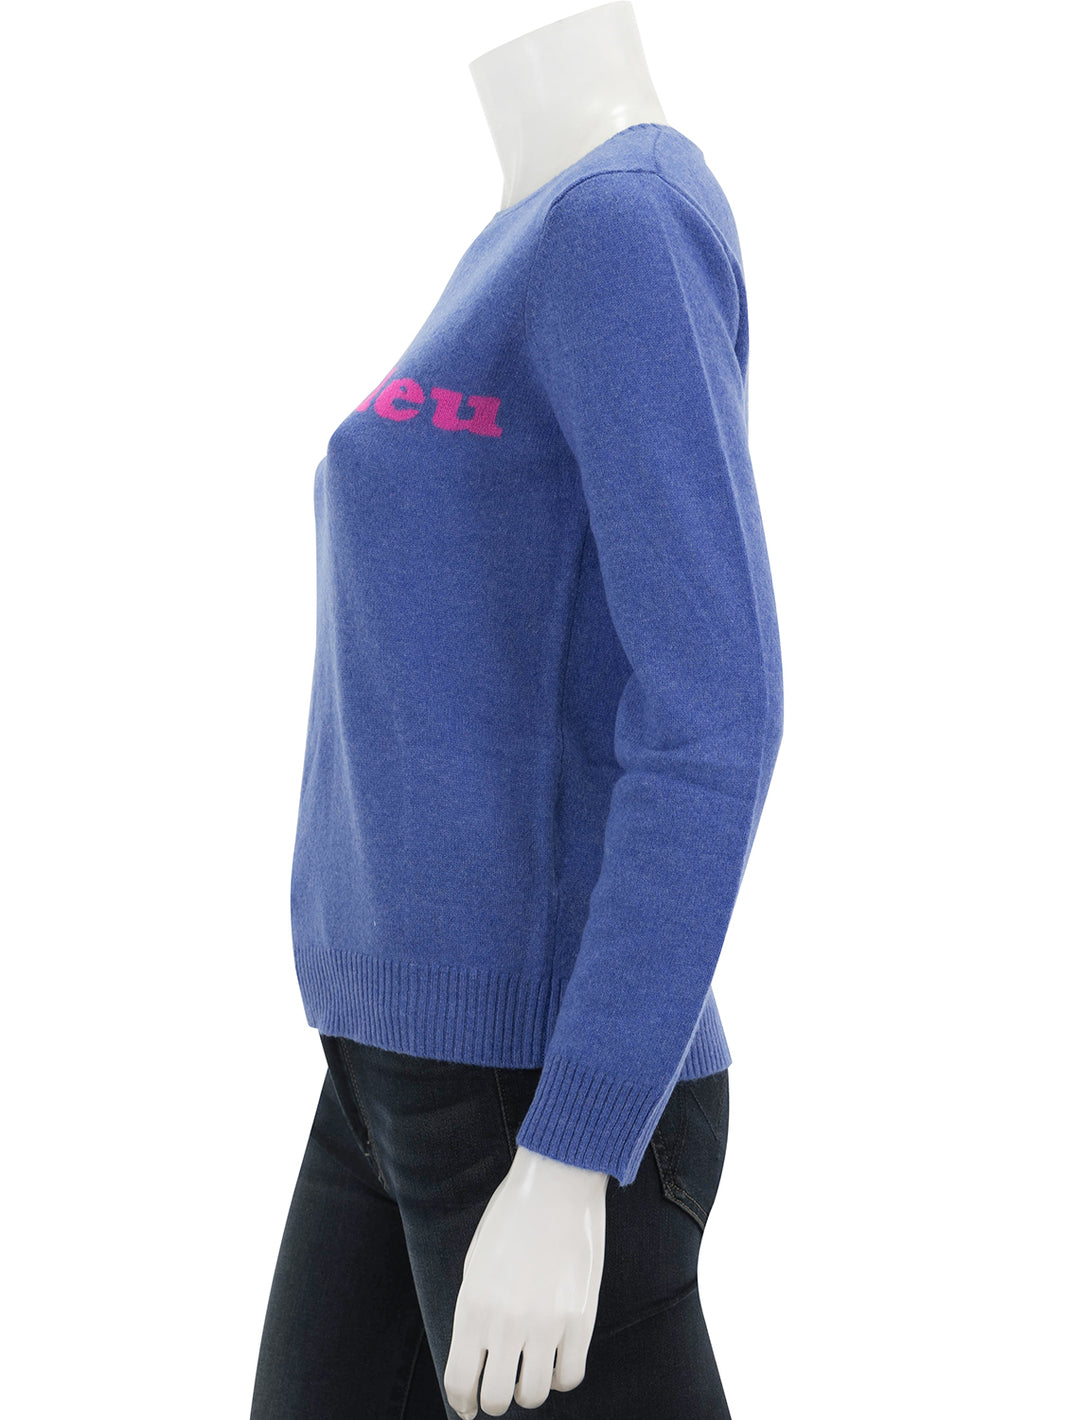 Side view of Jumper 1234's sacre bleu crew in periwinkle and hot pink.